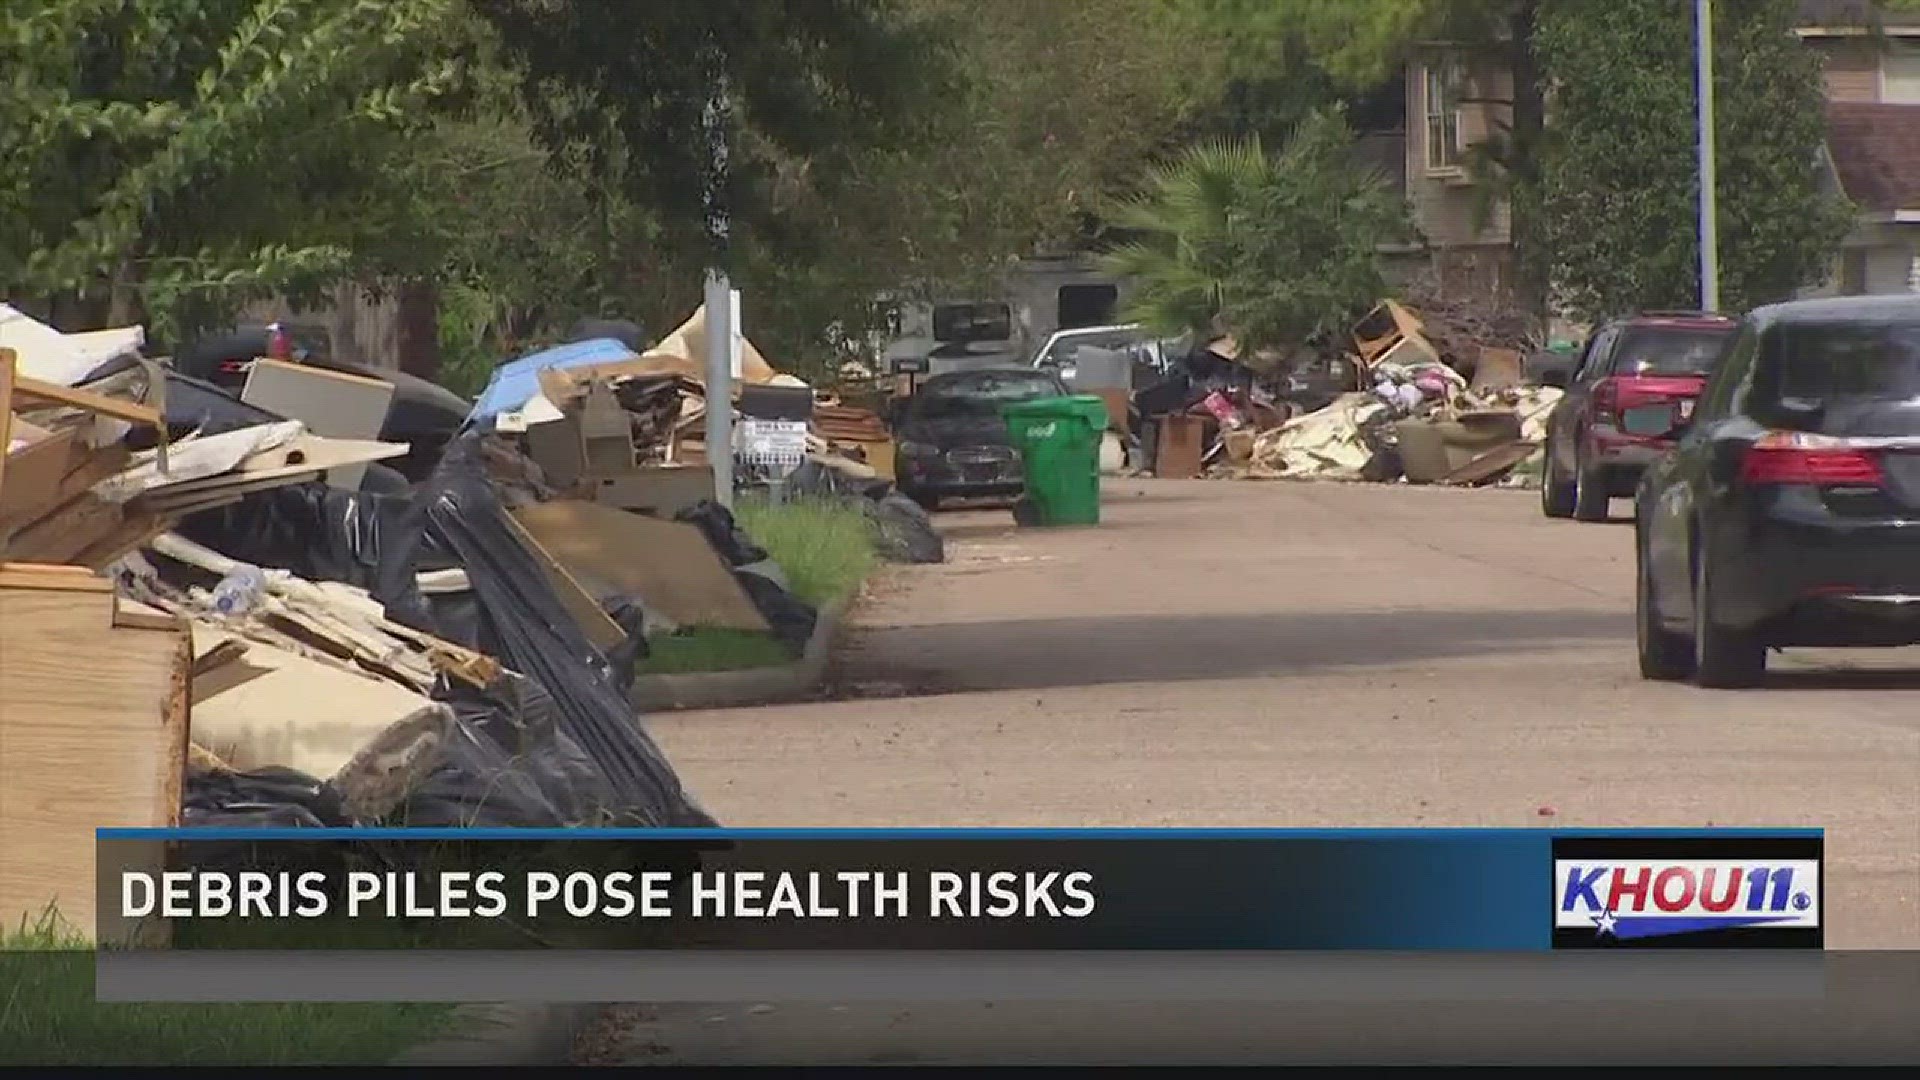 As residents work to clean out their flooded homes, they may not realize the risks that remain in their streets. Dirt and debris left behind from floodwaters may pose health hazards that many have not yet heard of. "We've done some testing. Very little is